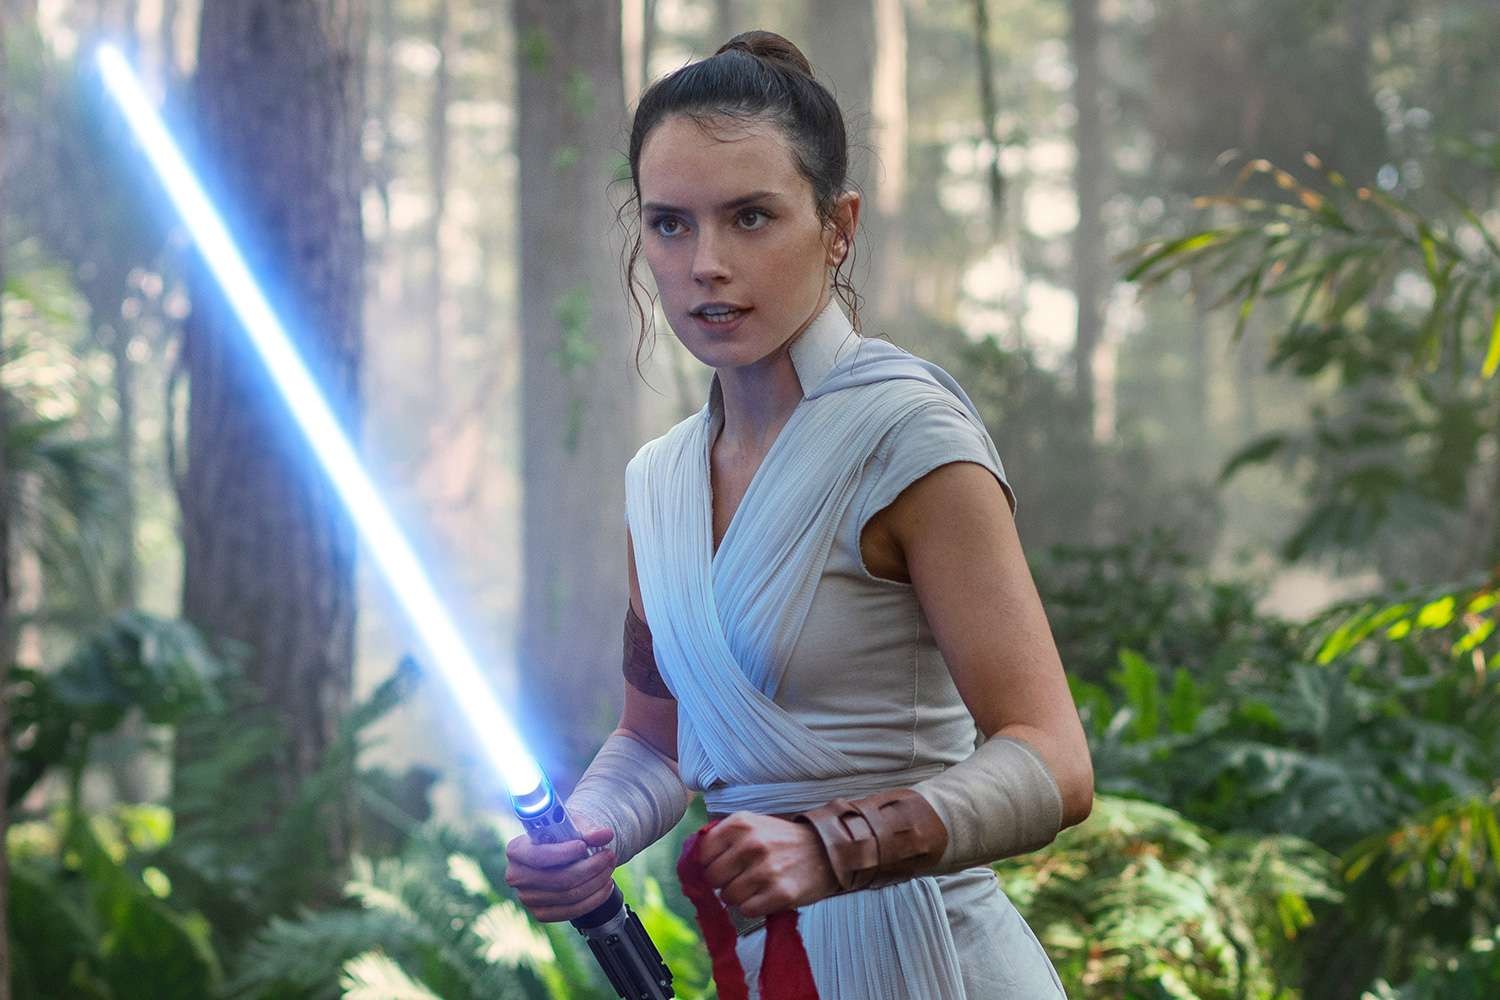 Daisy Ridley is excited forher new Star Wars film